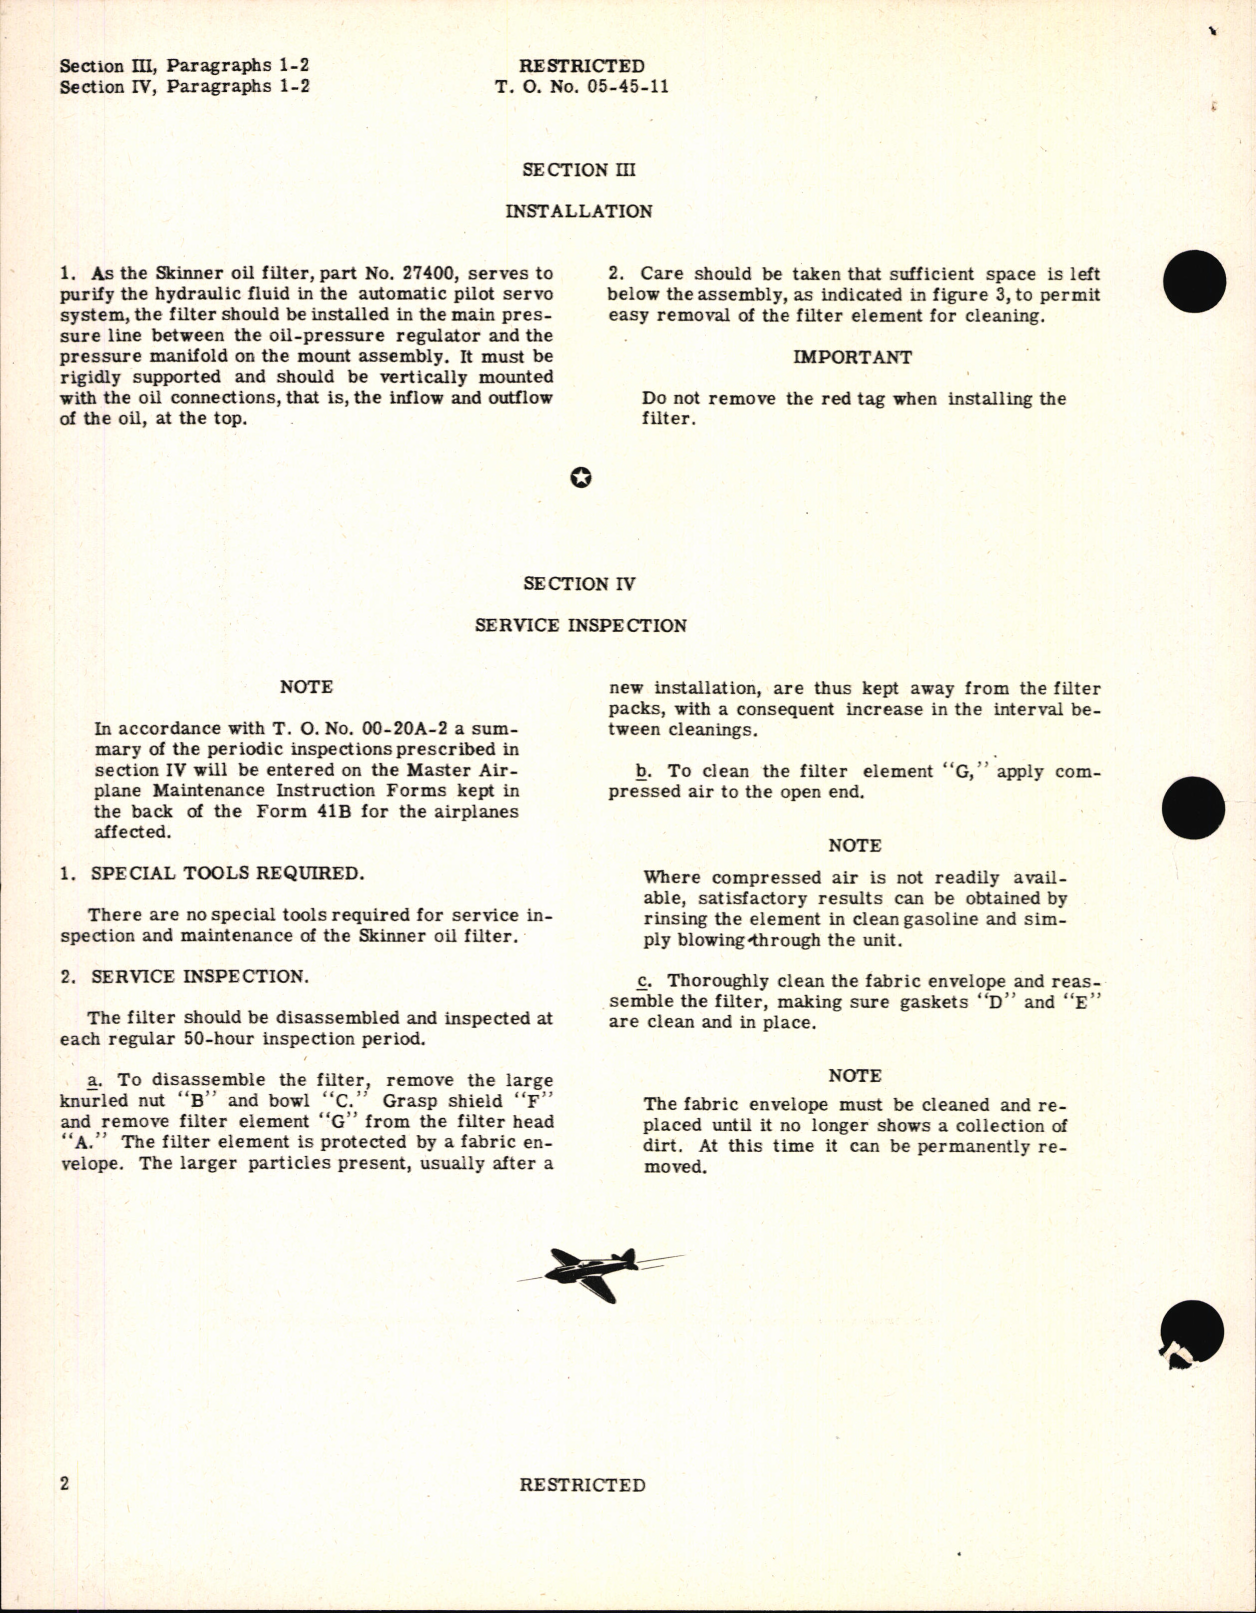 Sample page 6 from AirCorps Library document: Handbook of Instructions with Parts Catalog for Oil Filters for Aircraft Automatic Pilots